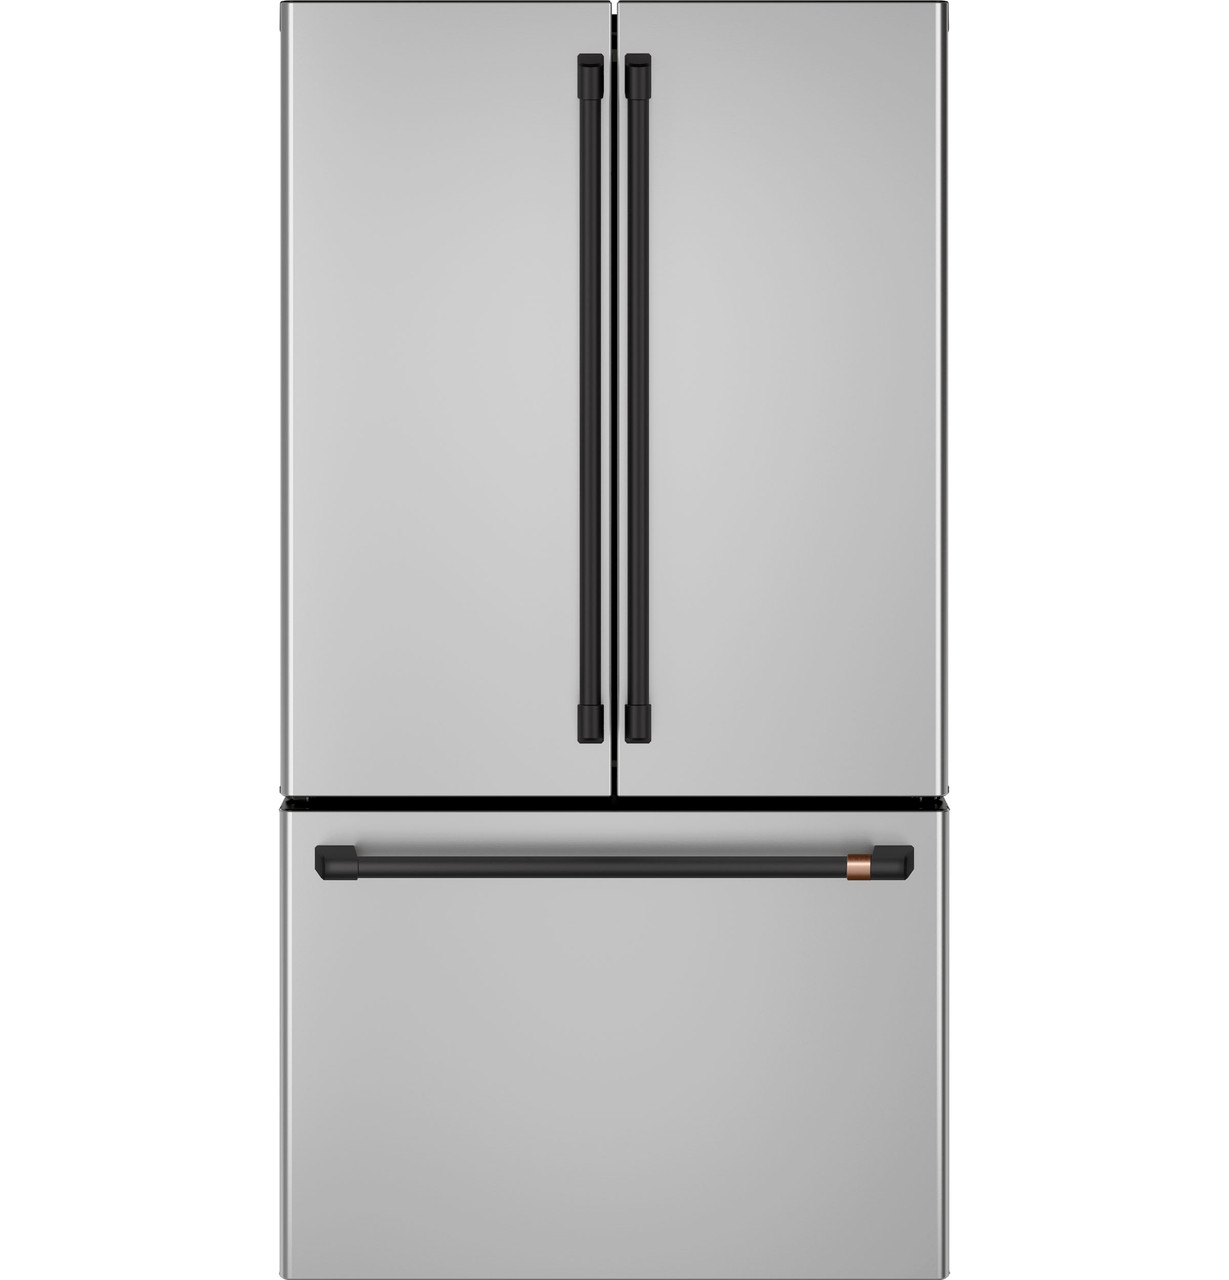 GE Profile Refrigerator Not Cooling? How to Fix It - Authorized Service